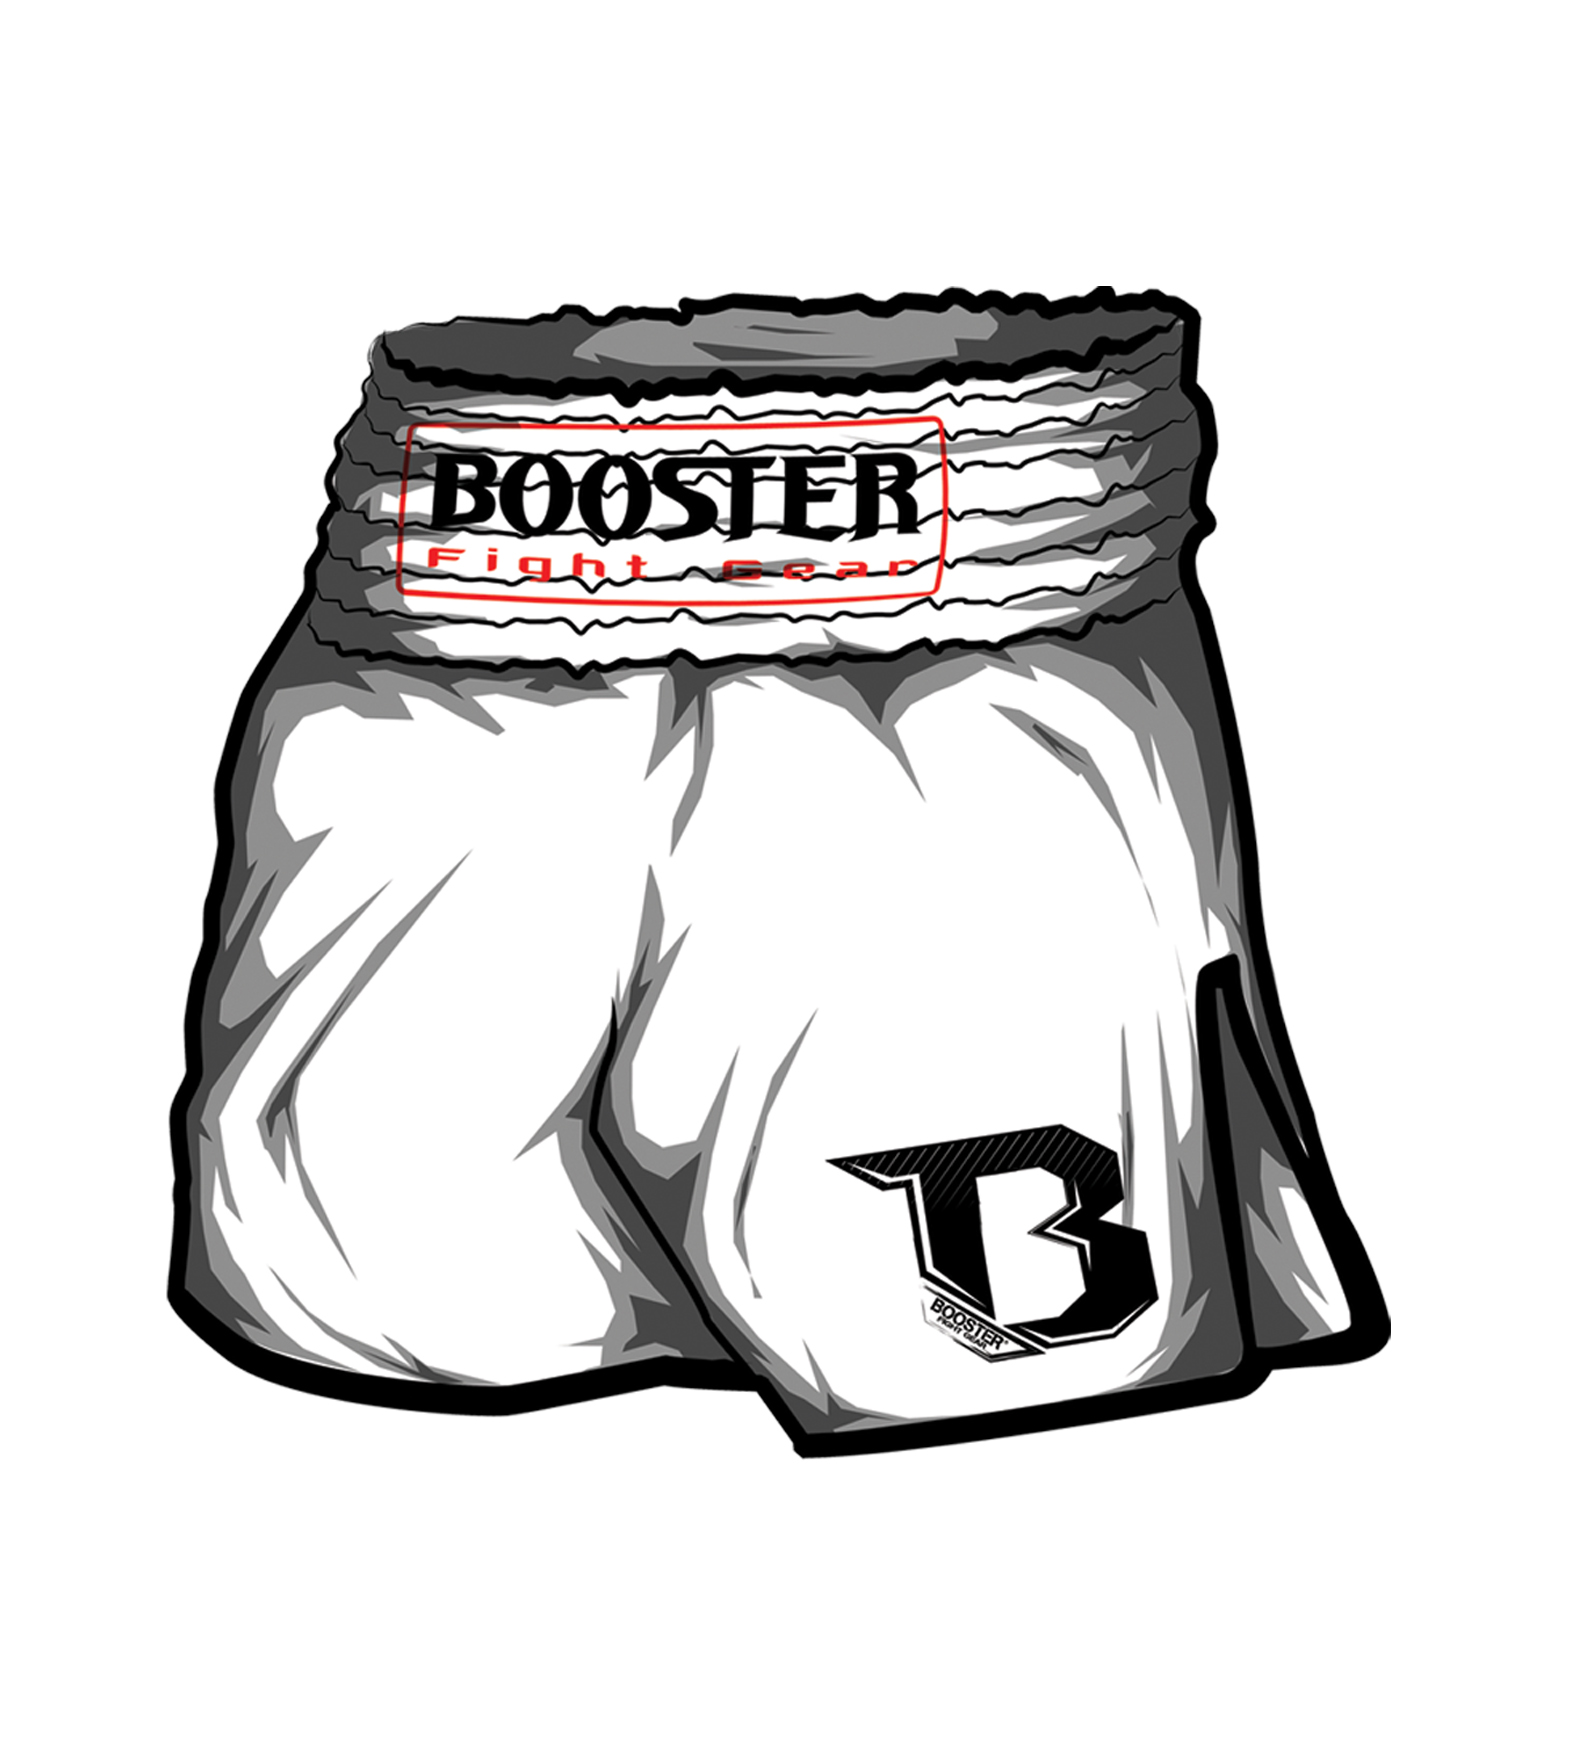 Booster  TBS trunks white - S